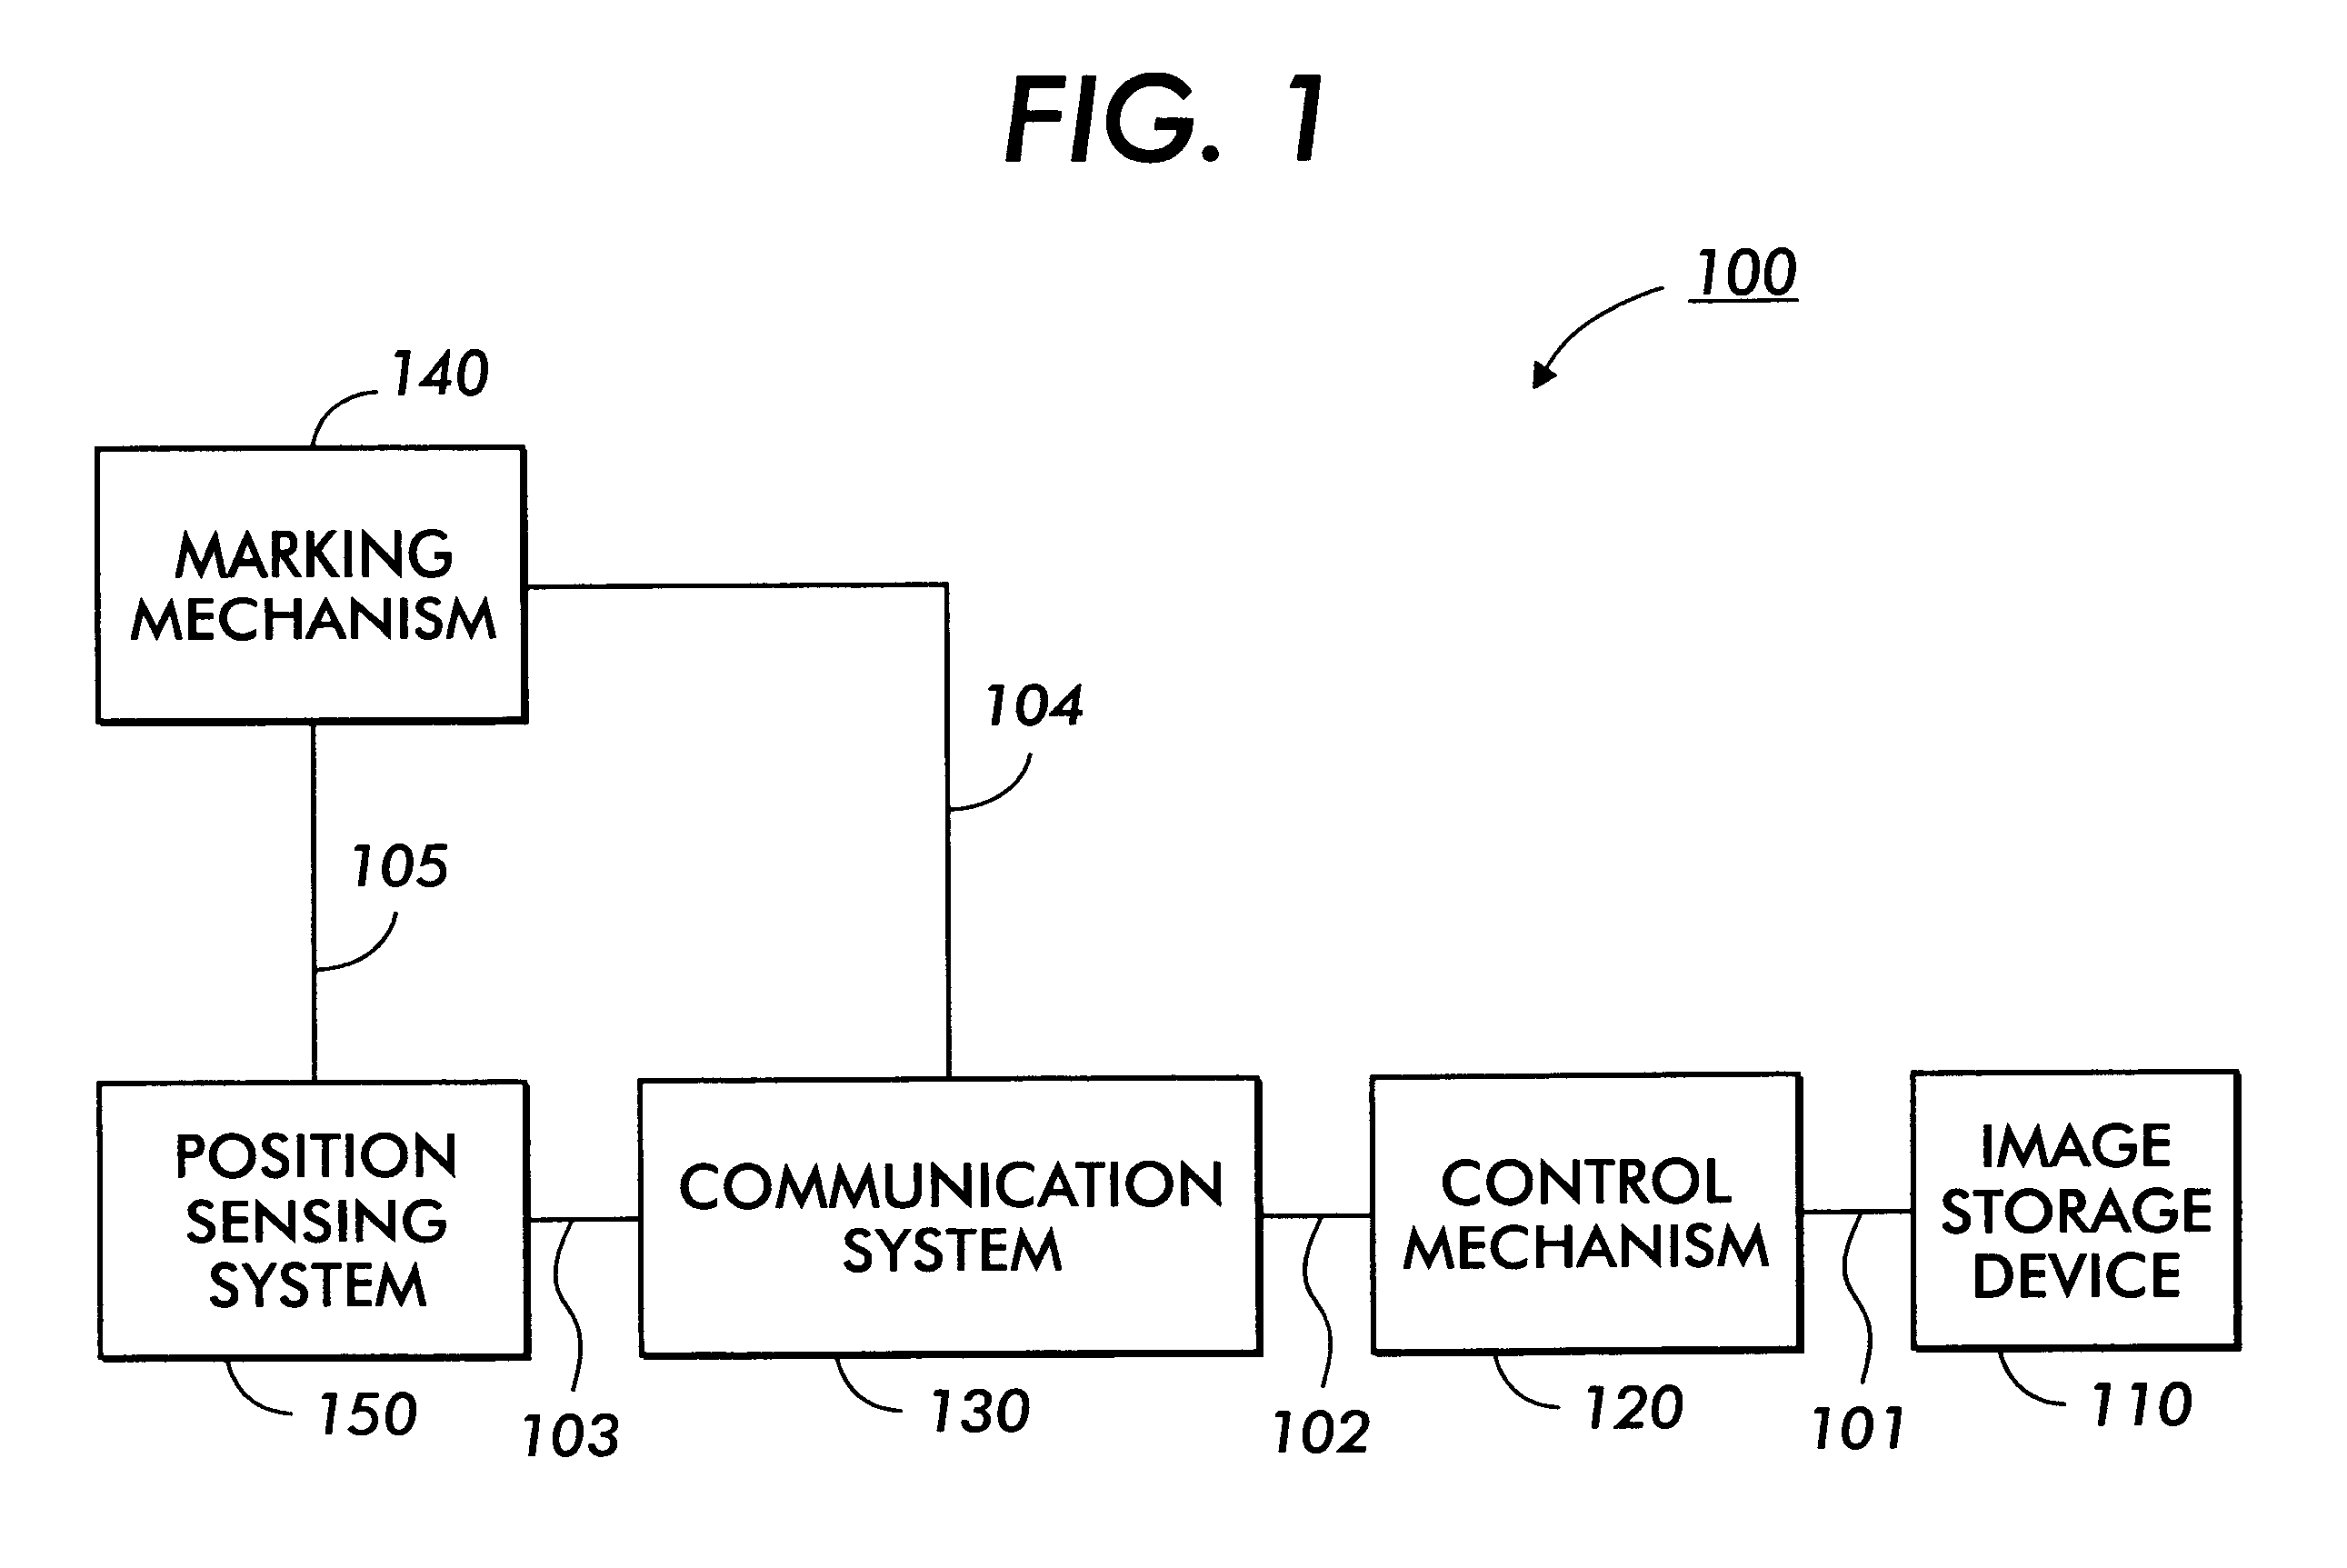 Systems and methods for hand-held printing on a surface or medium